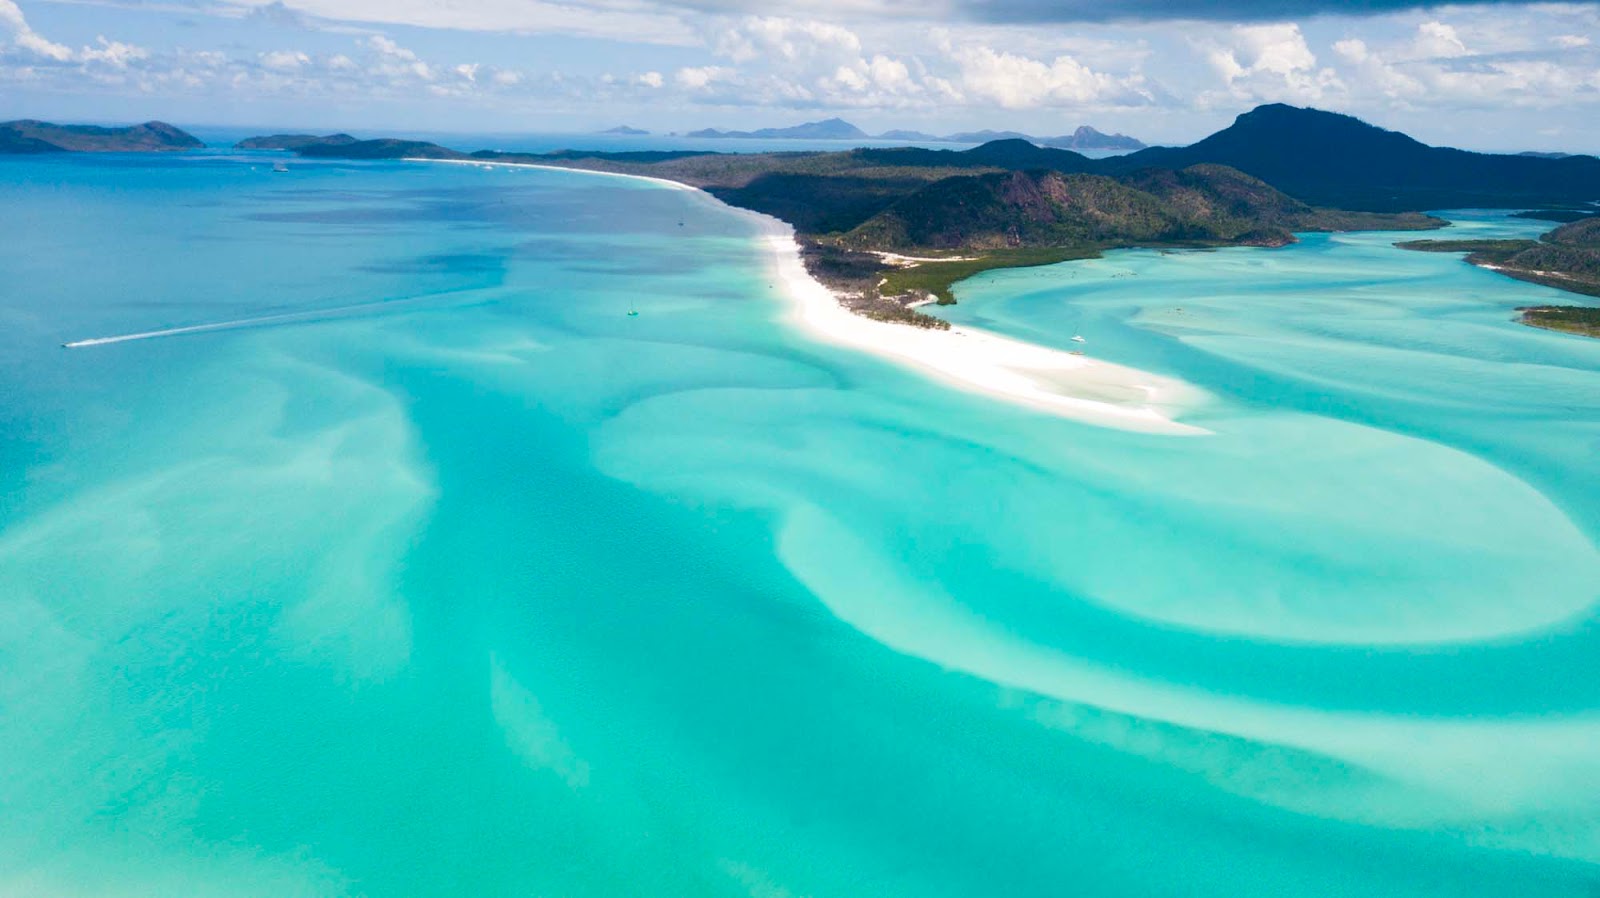 A Make Believe World Travel Blog: The Ultimate Day Out to the Whitsundays